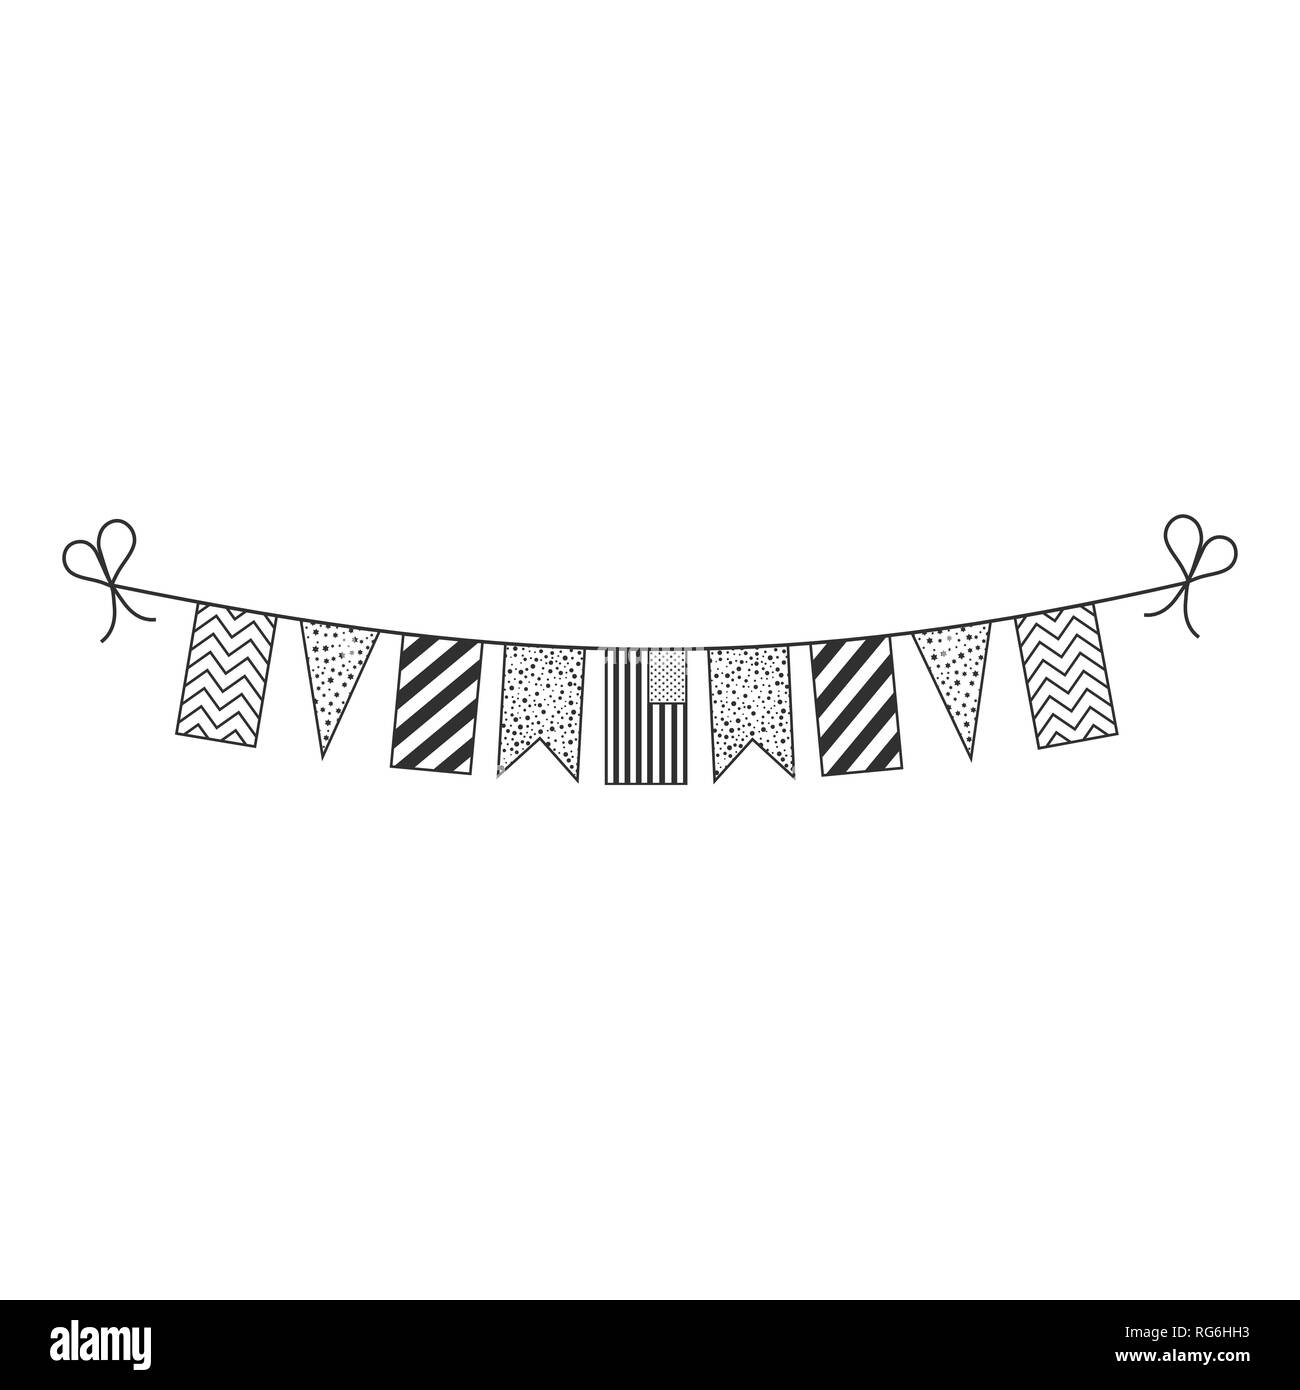 Decorations bunting flags for United States national day holiday in black outline flat design. Independence day or National day holiday concept. Stock Vector